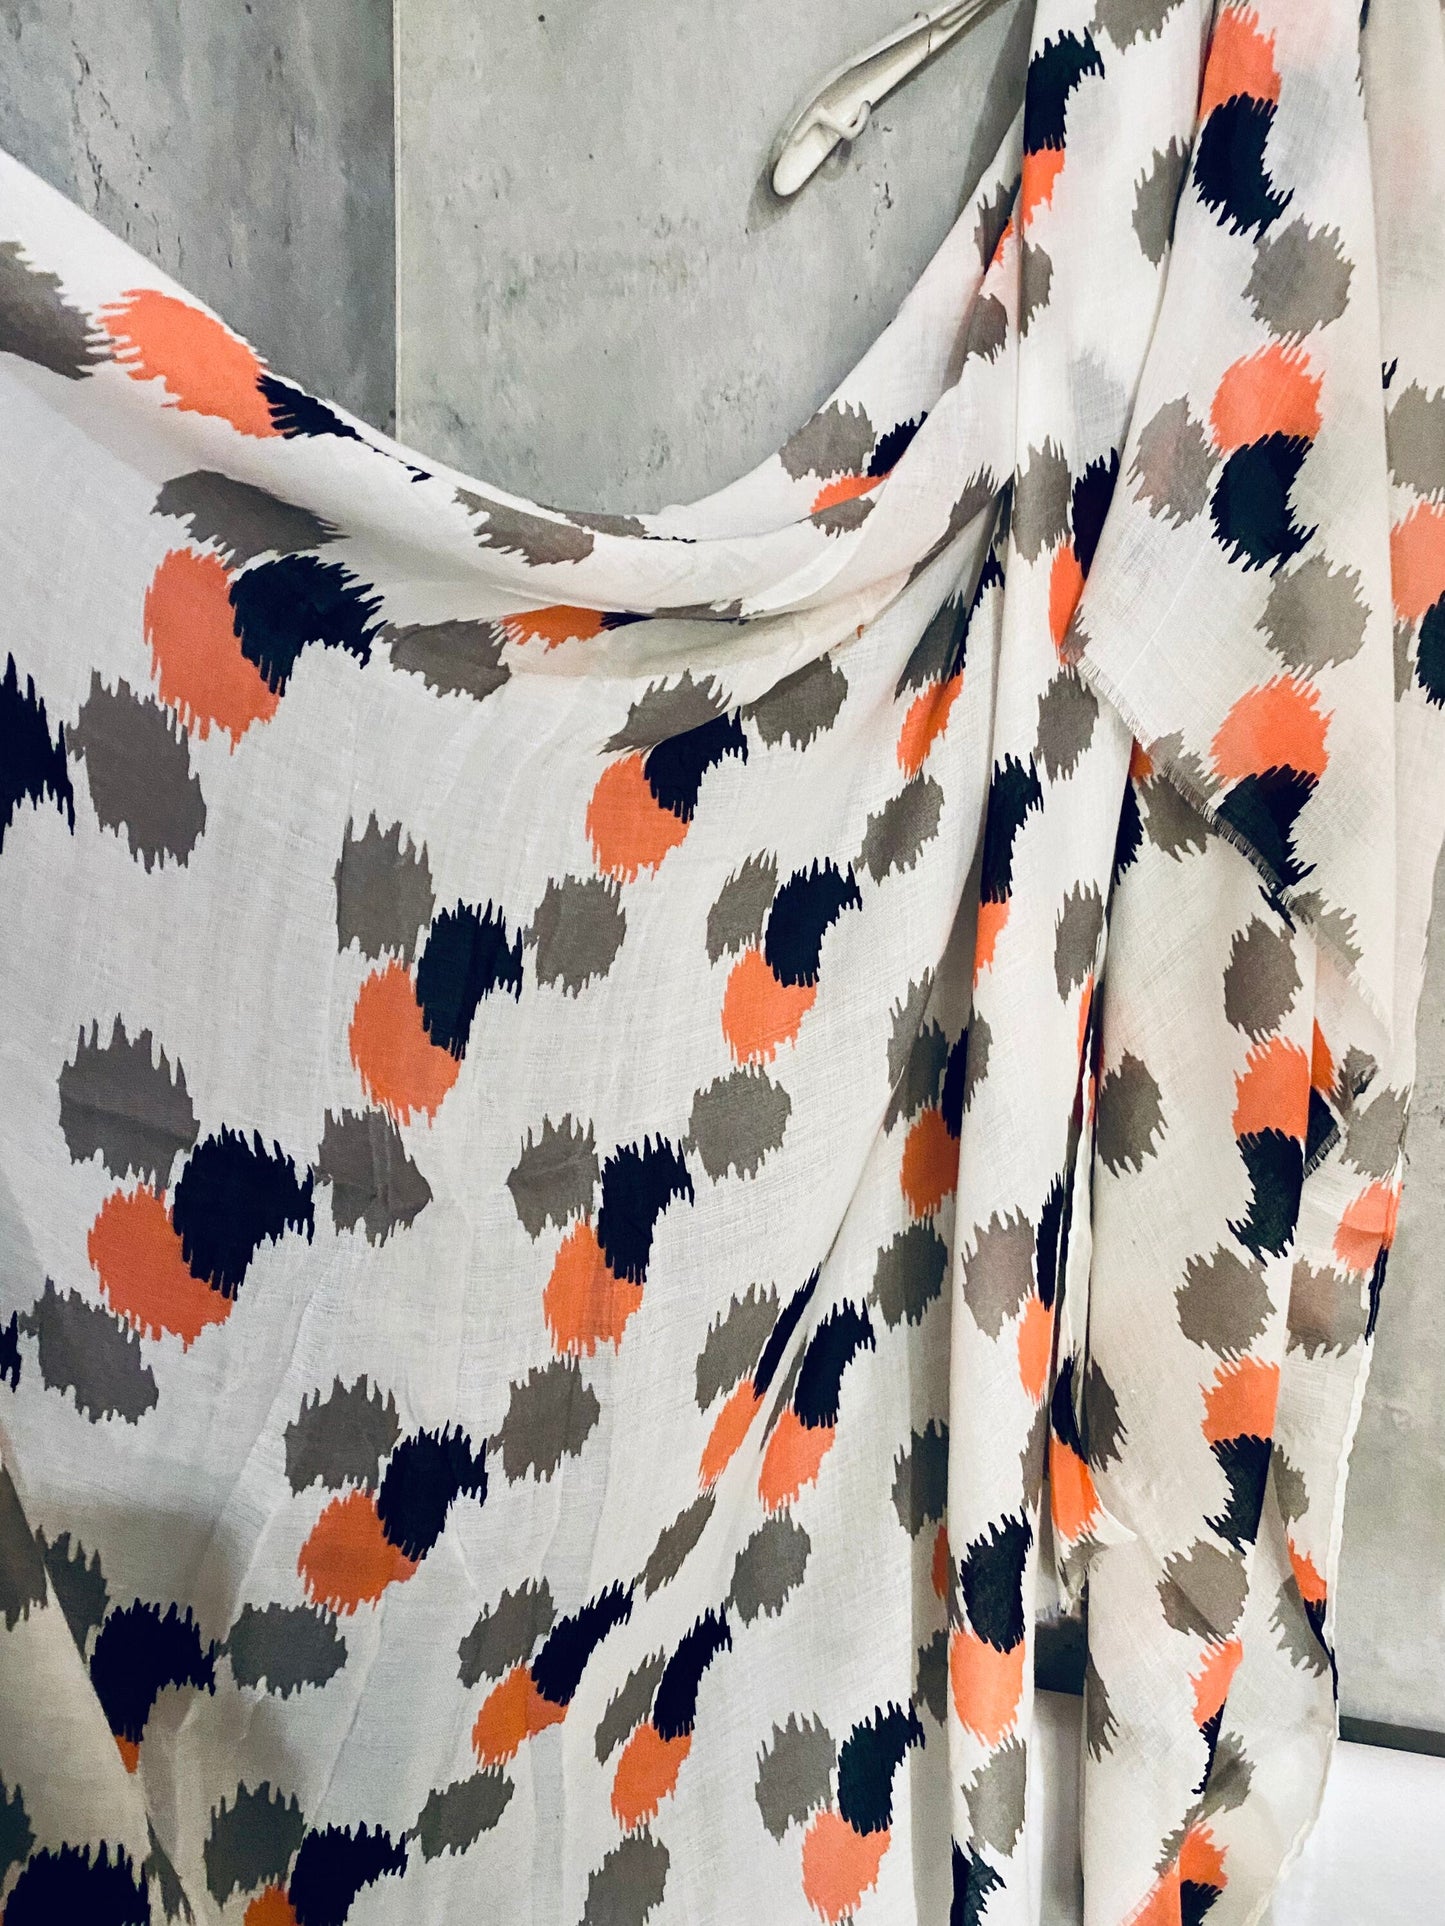 Spotty Ikat Orange White Cotton Scarf/Spring Summer Scarf/Gifts For Mom/UK Seller/Scarf Women/Gifts For Her Birthday Christmas